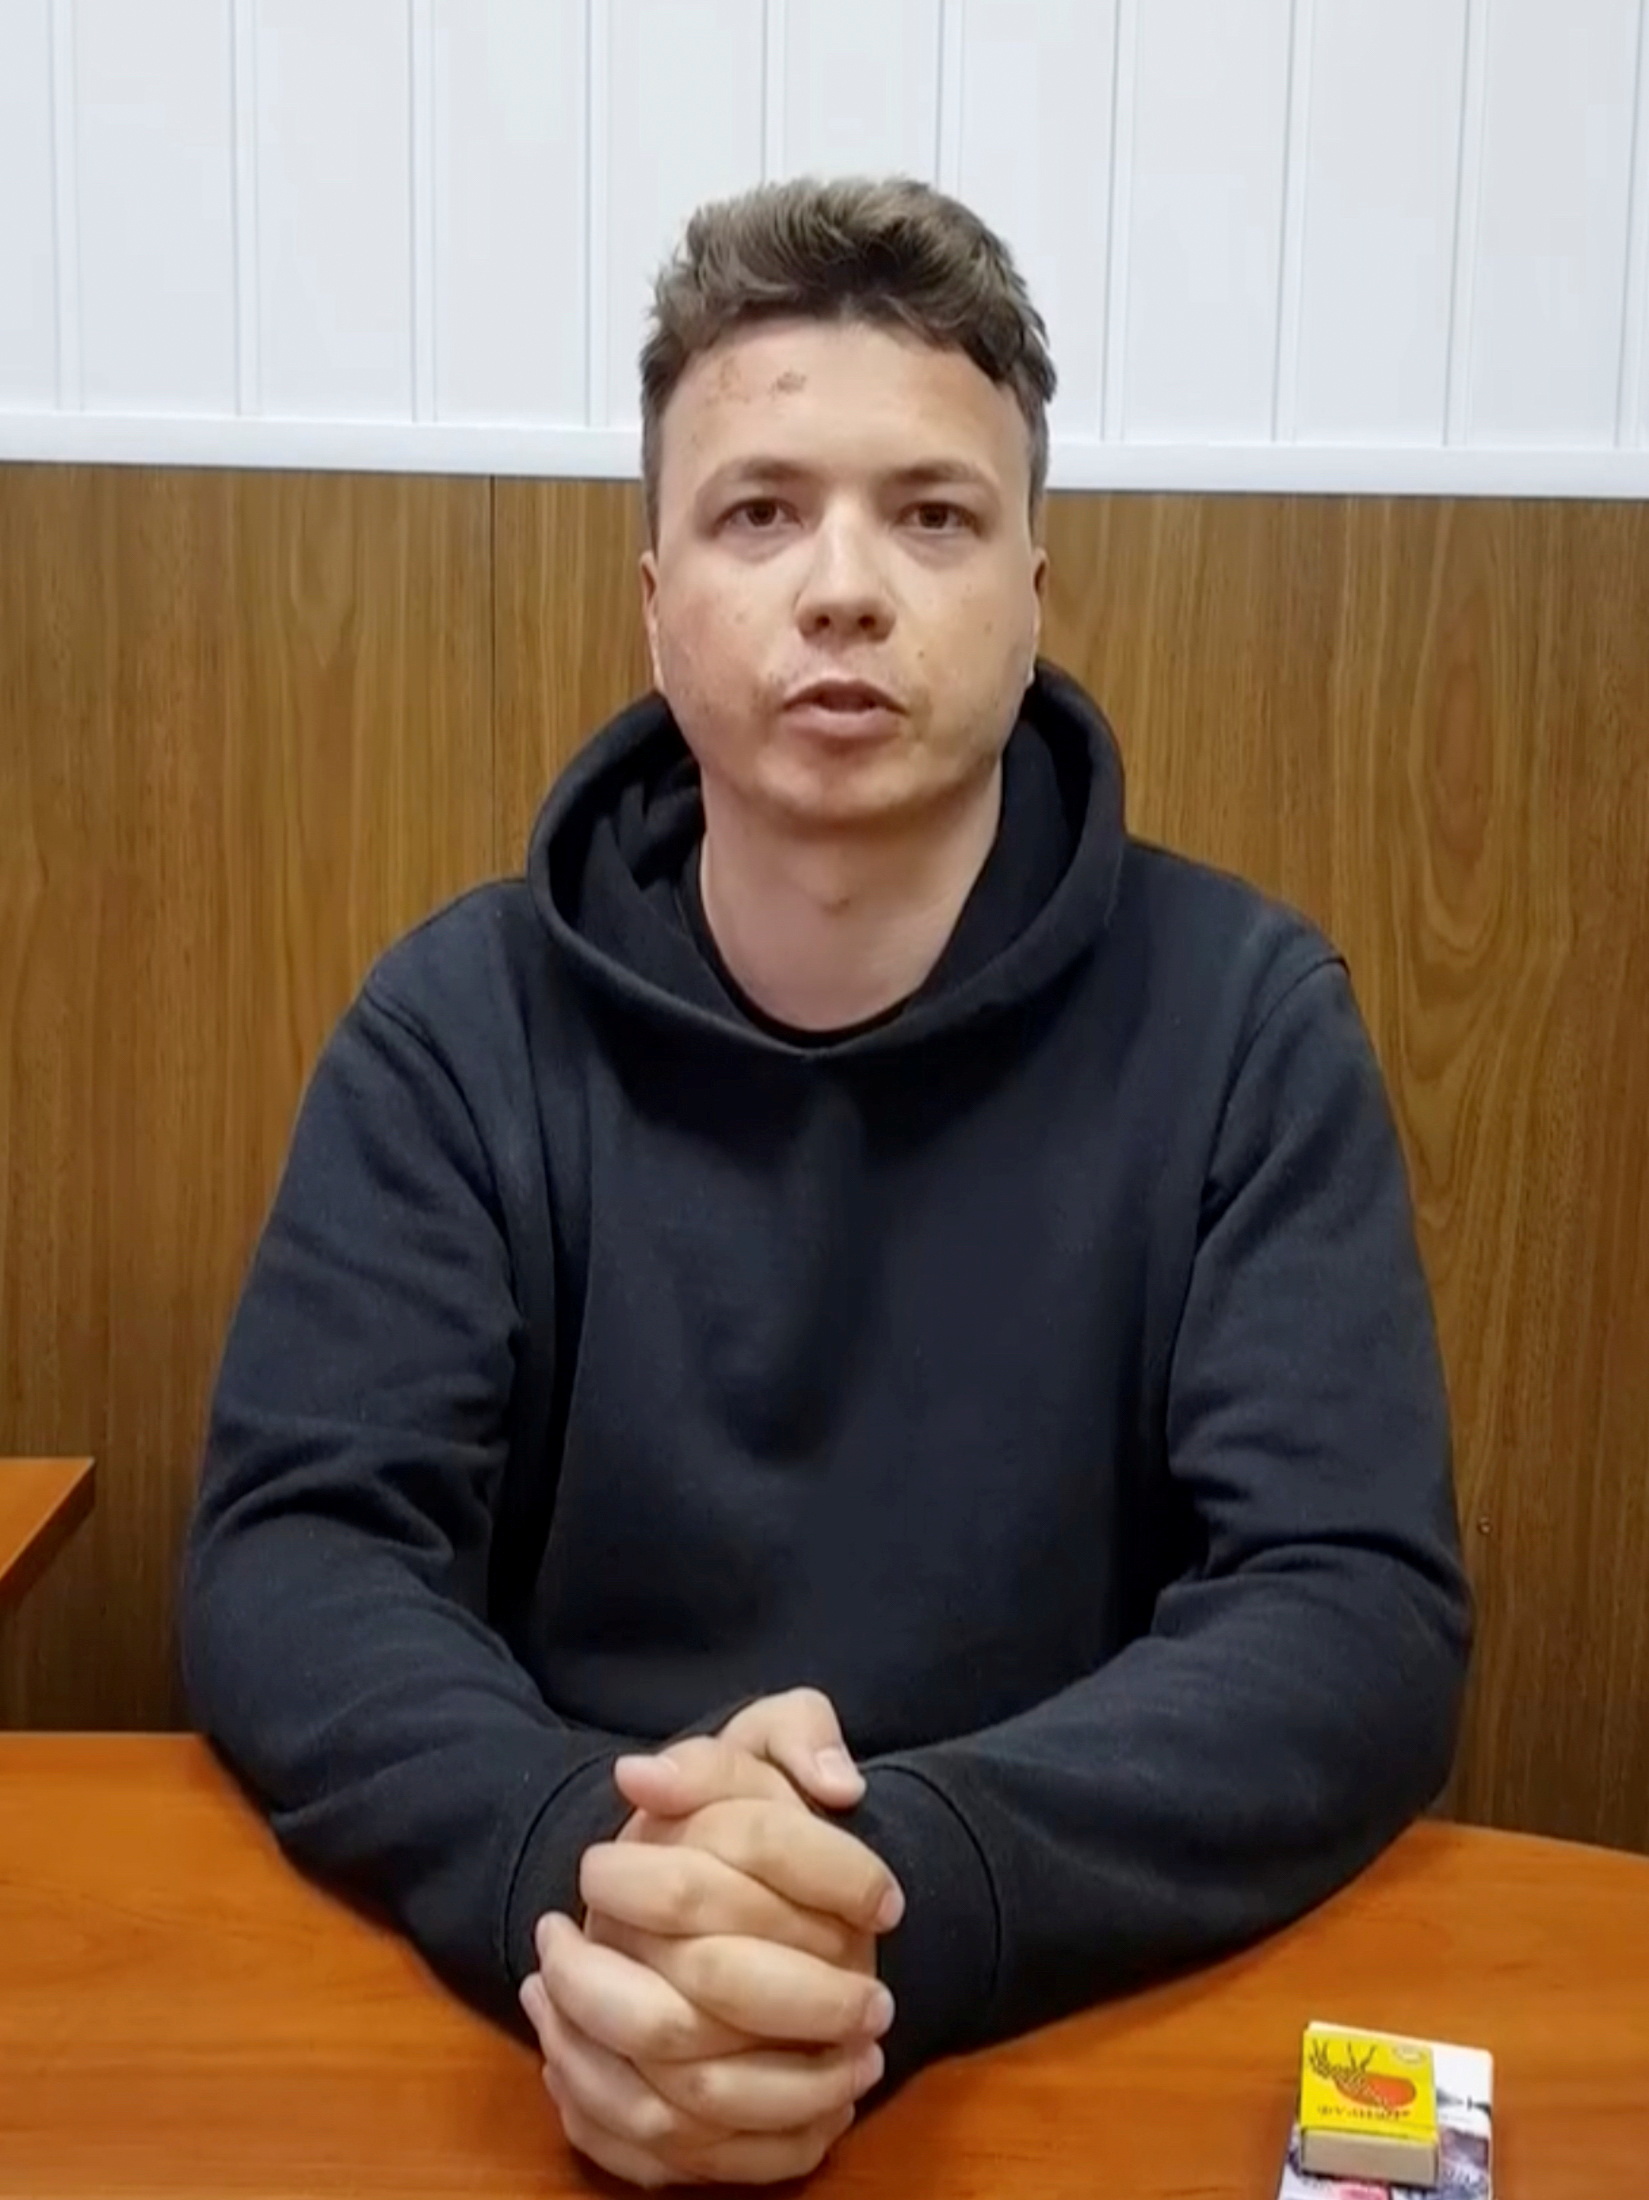 Belarusian blogger Roman Protasevich, detained when a Ryanair plane was forced to land in Minsk, appears in video